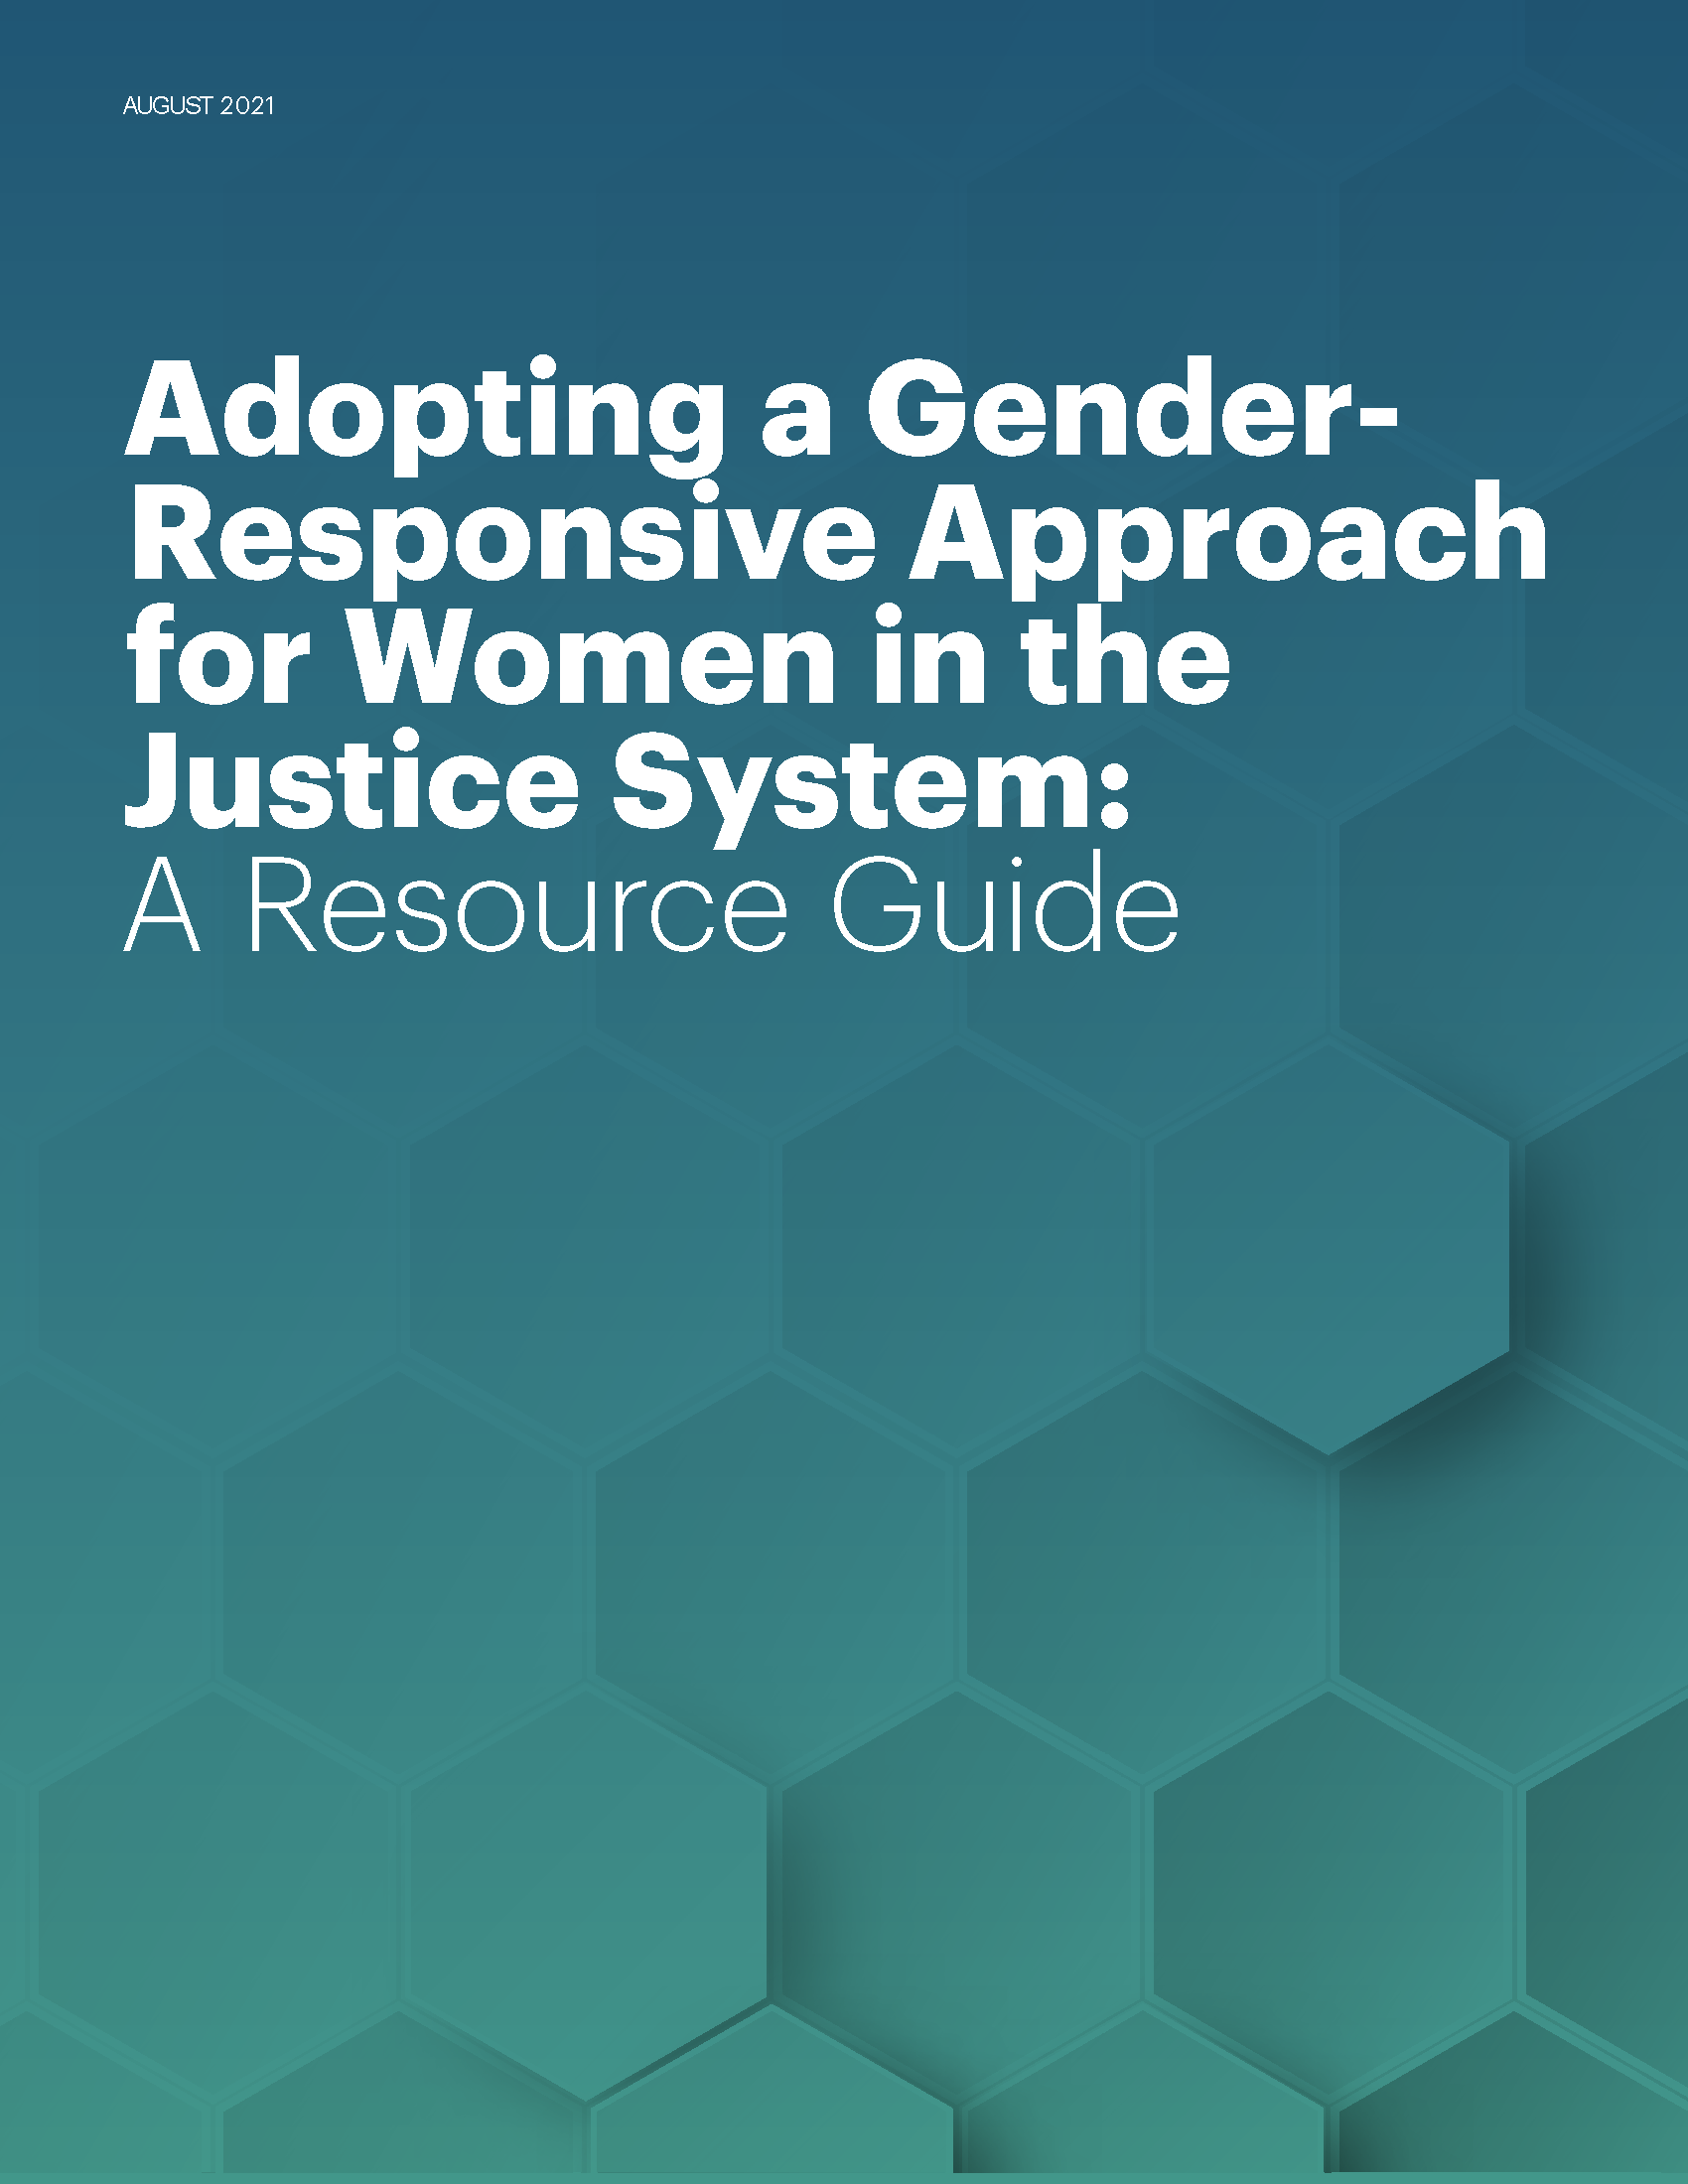 Adopting a Gender-Responsive Approach for Women in the Justice